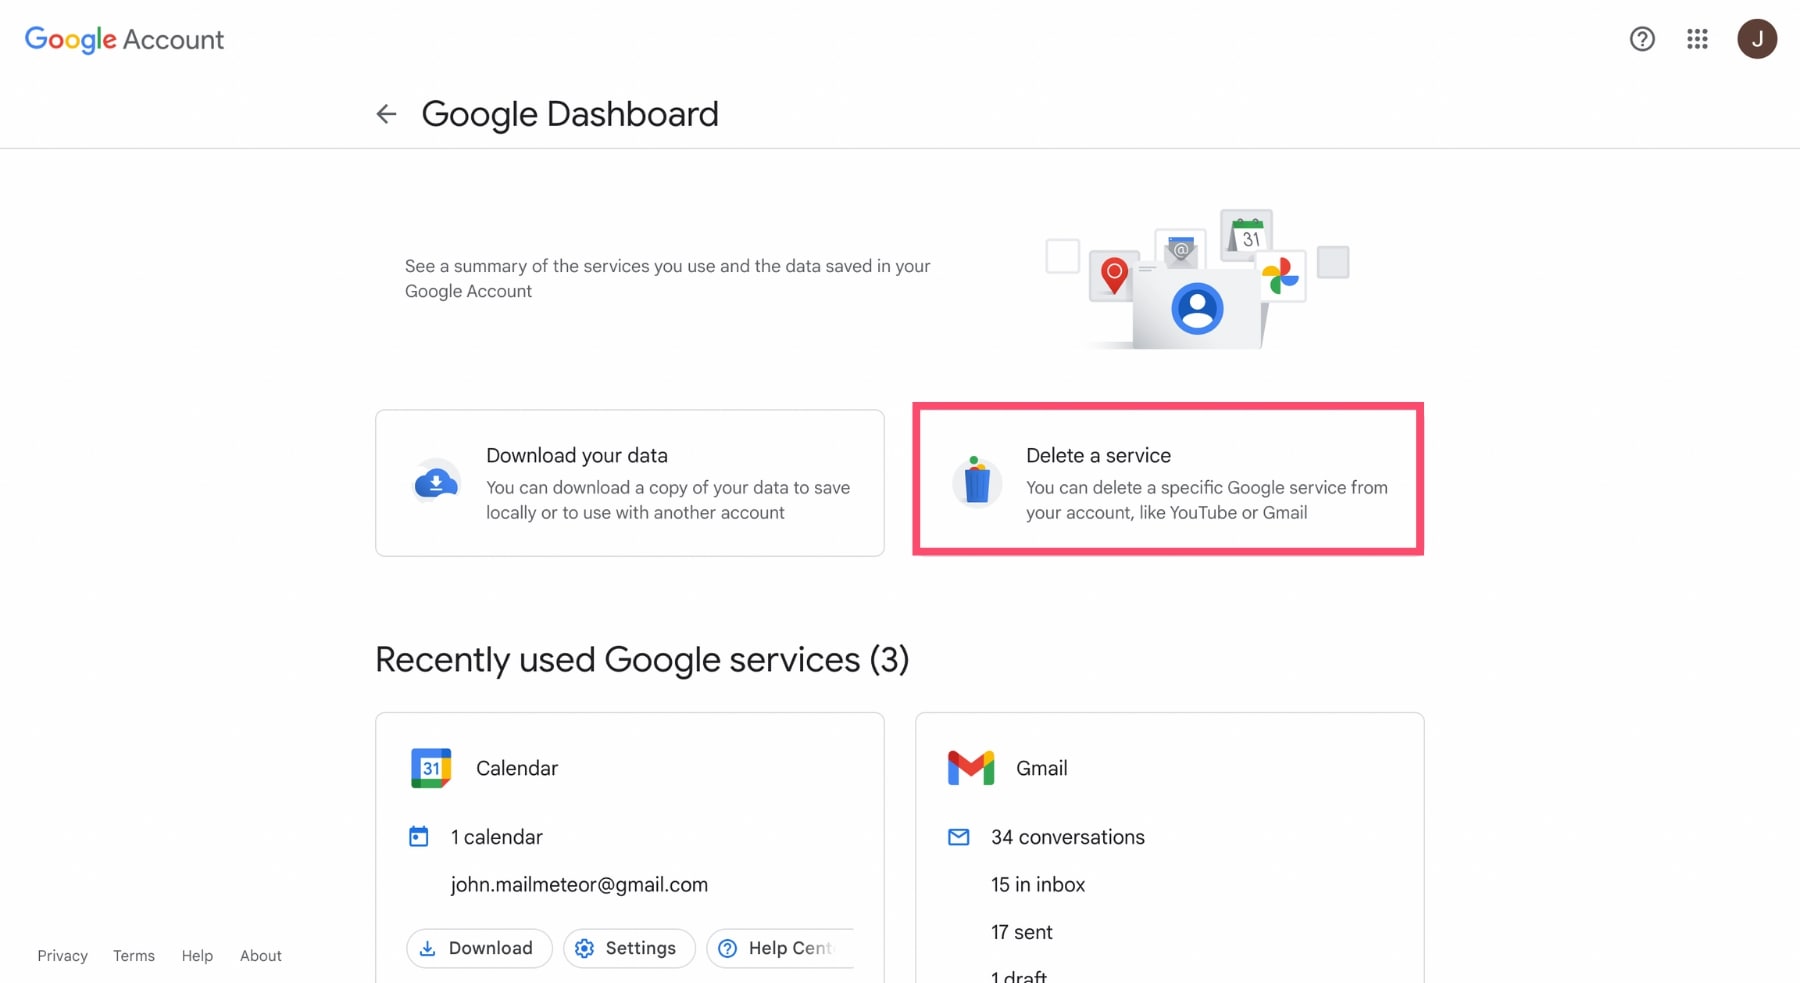 Delete a service from your Google account